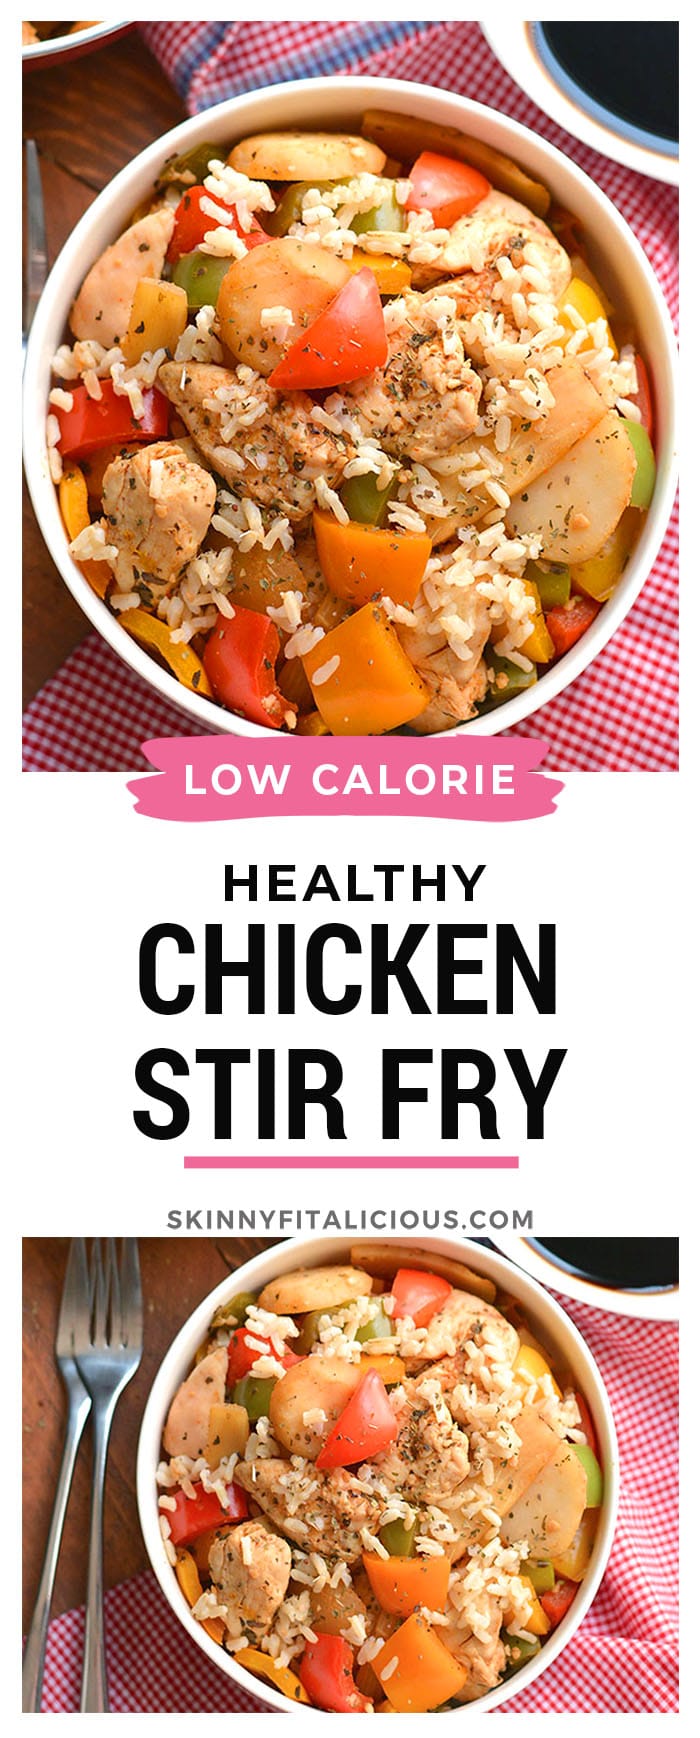 15 Minute Chicken Stir-Fry loaded with veggies and flavor! A lighter, better for you version of takeout that's easy to make and tastes great. 